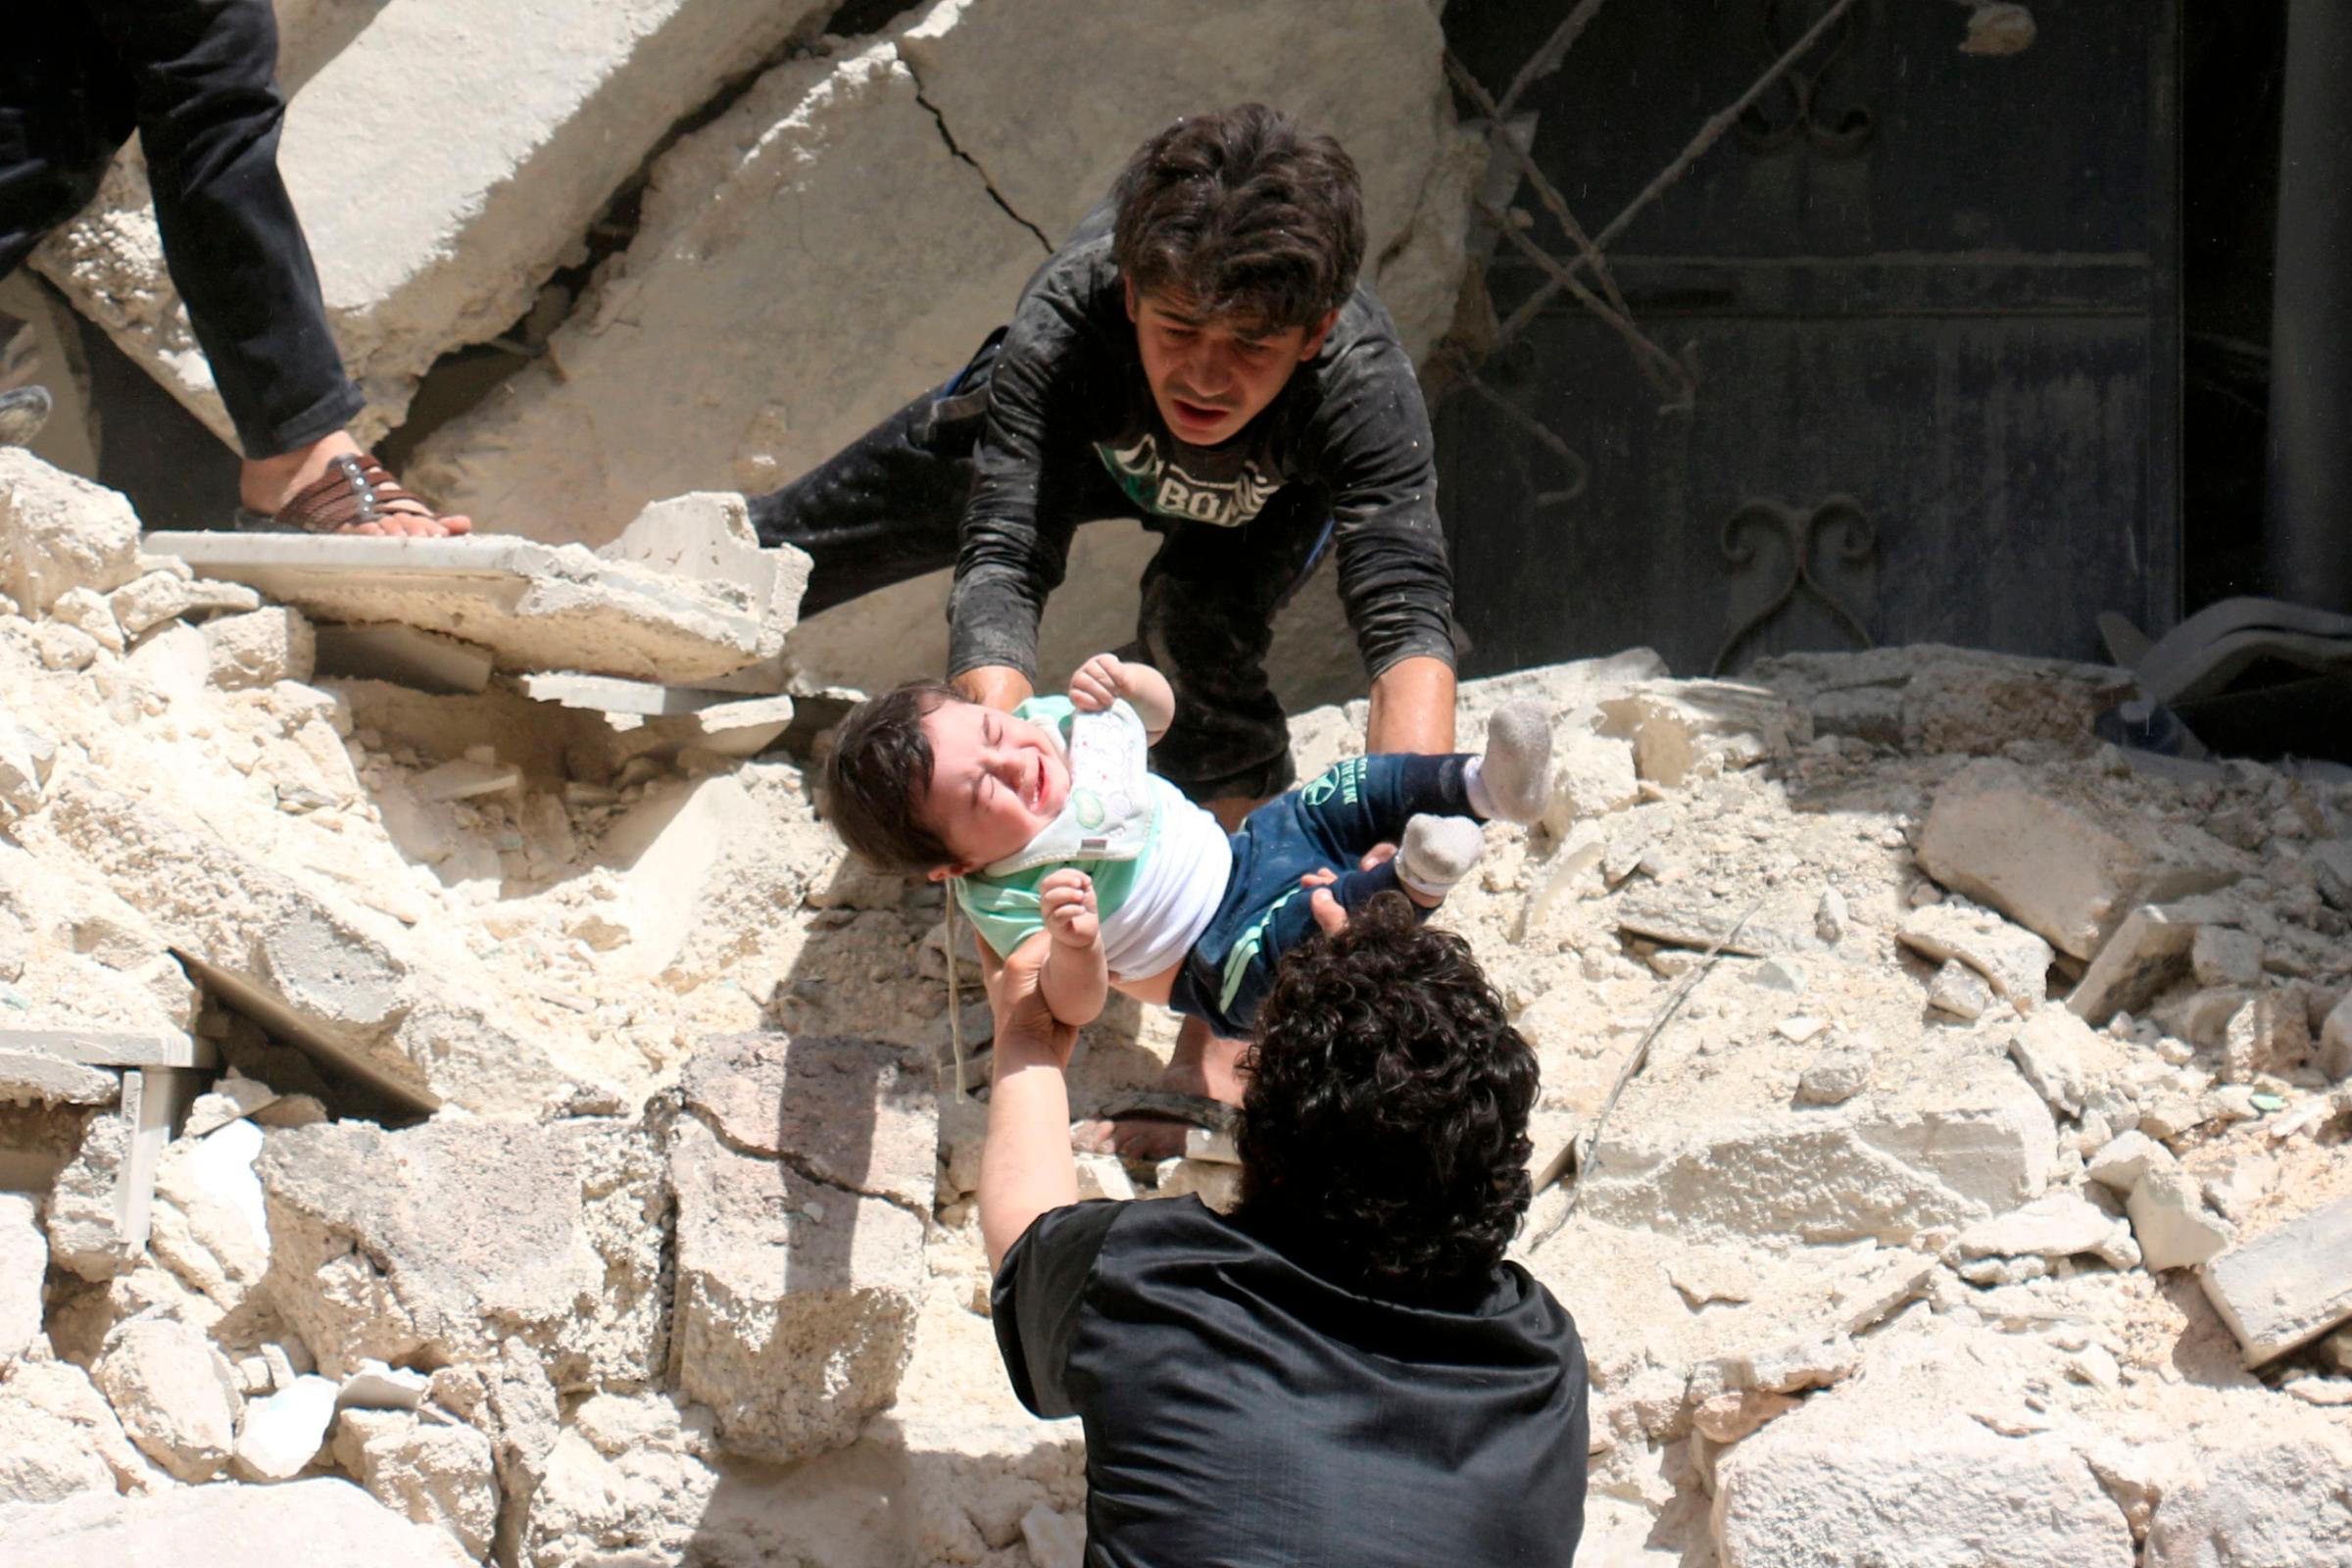 Men evacuate a toddler from a destroyed building following a reported airstrike on a rebel-held neighborhood in Aleppo, Syria, April 28, 2016.